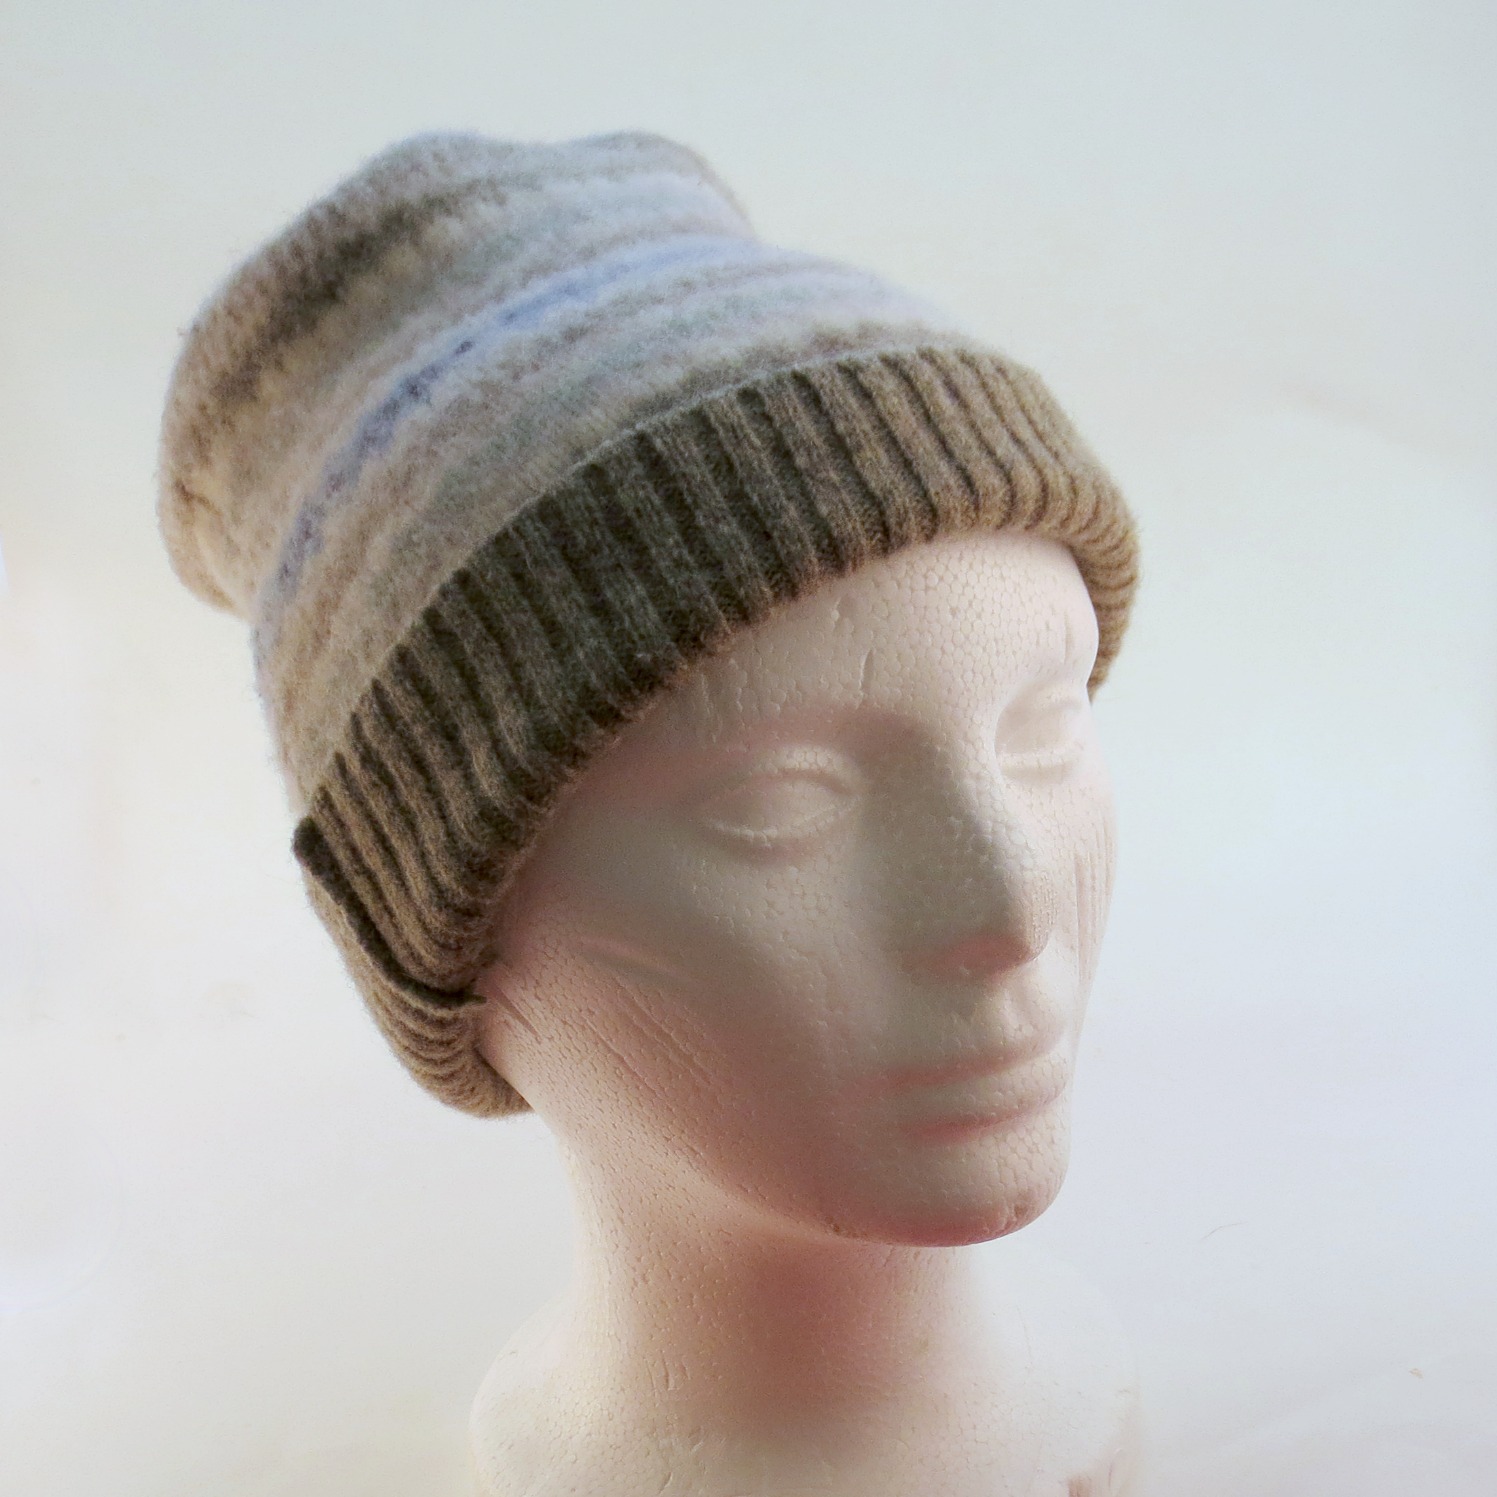 Hat from a wool sweater